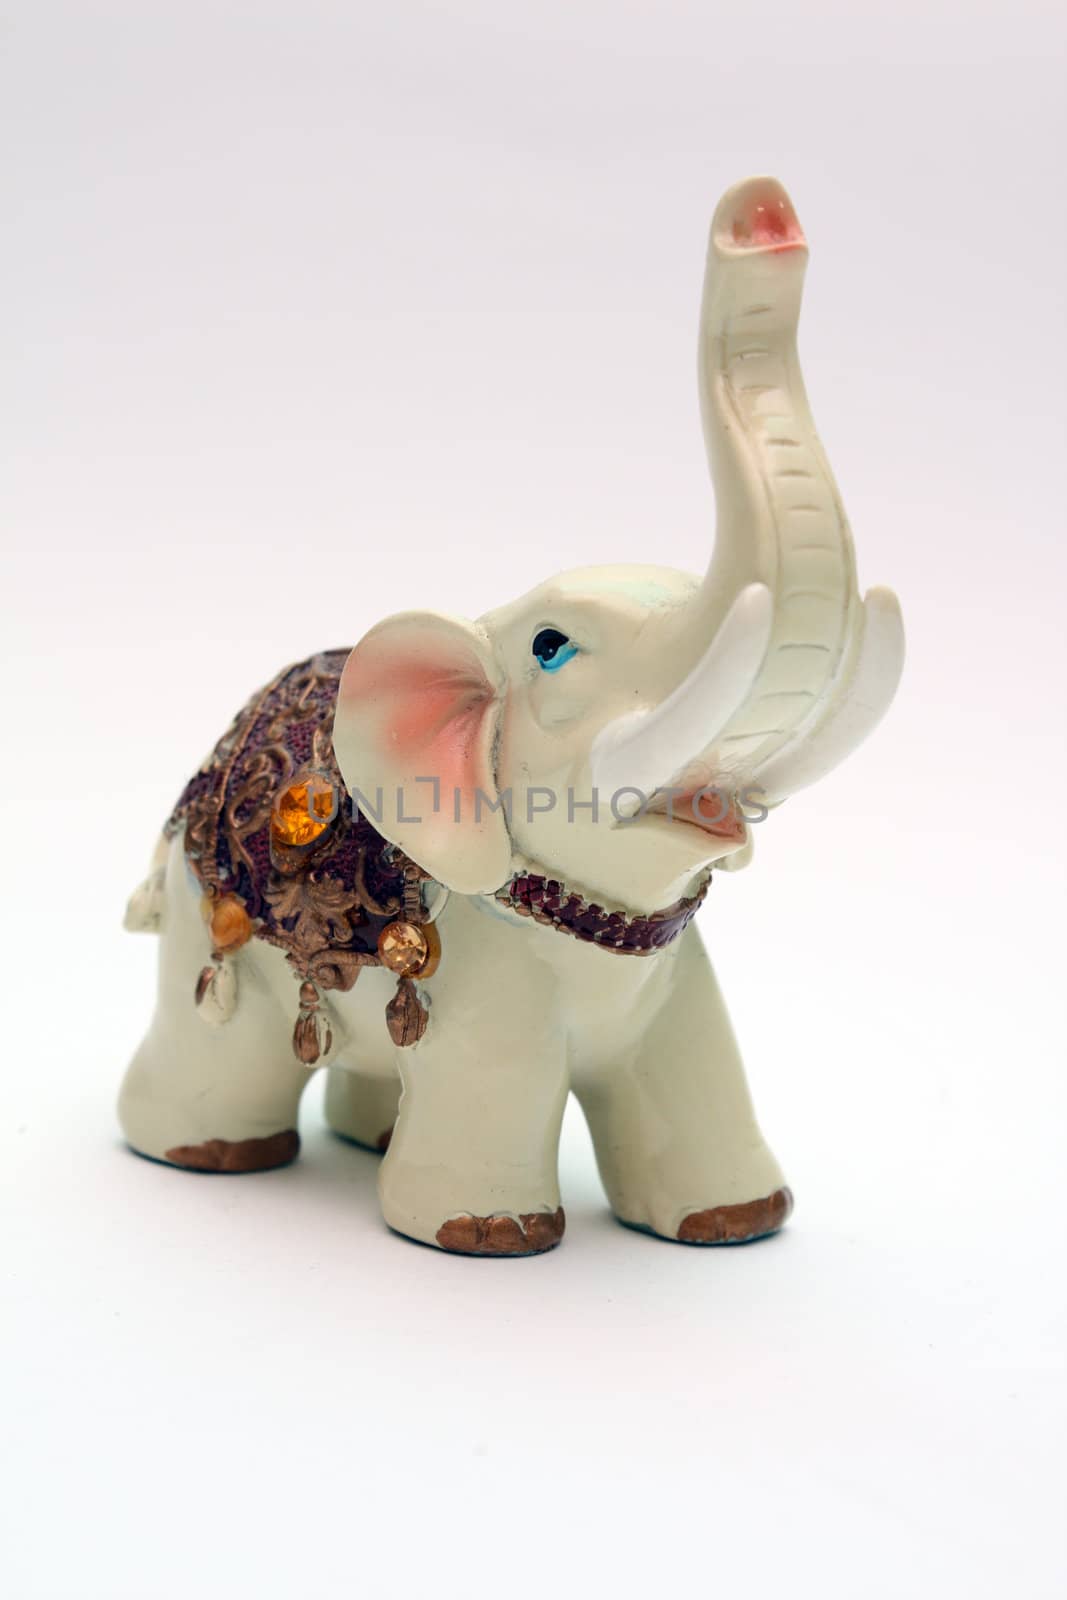 Old toy. Porcelain elephant. Symbol of good luck and Wealth